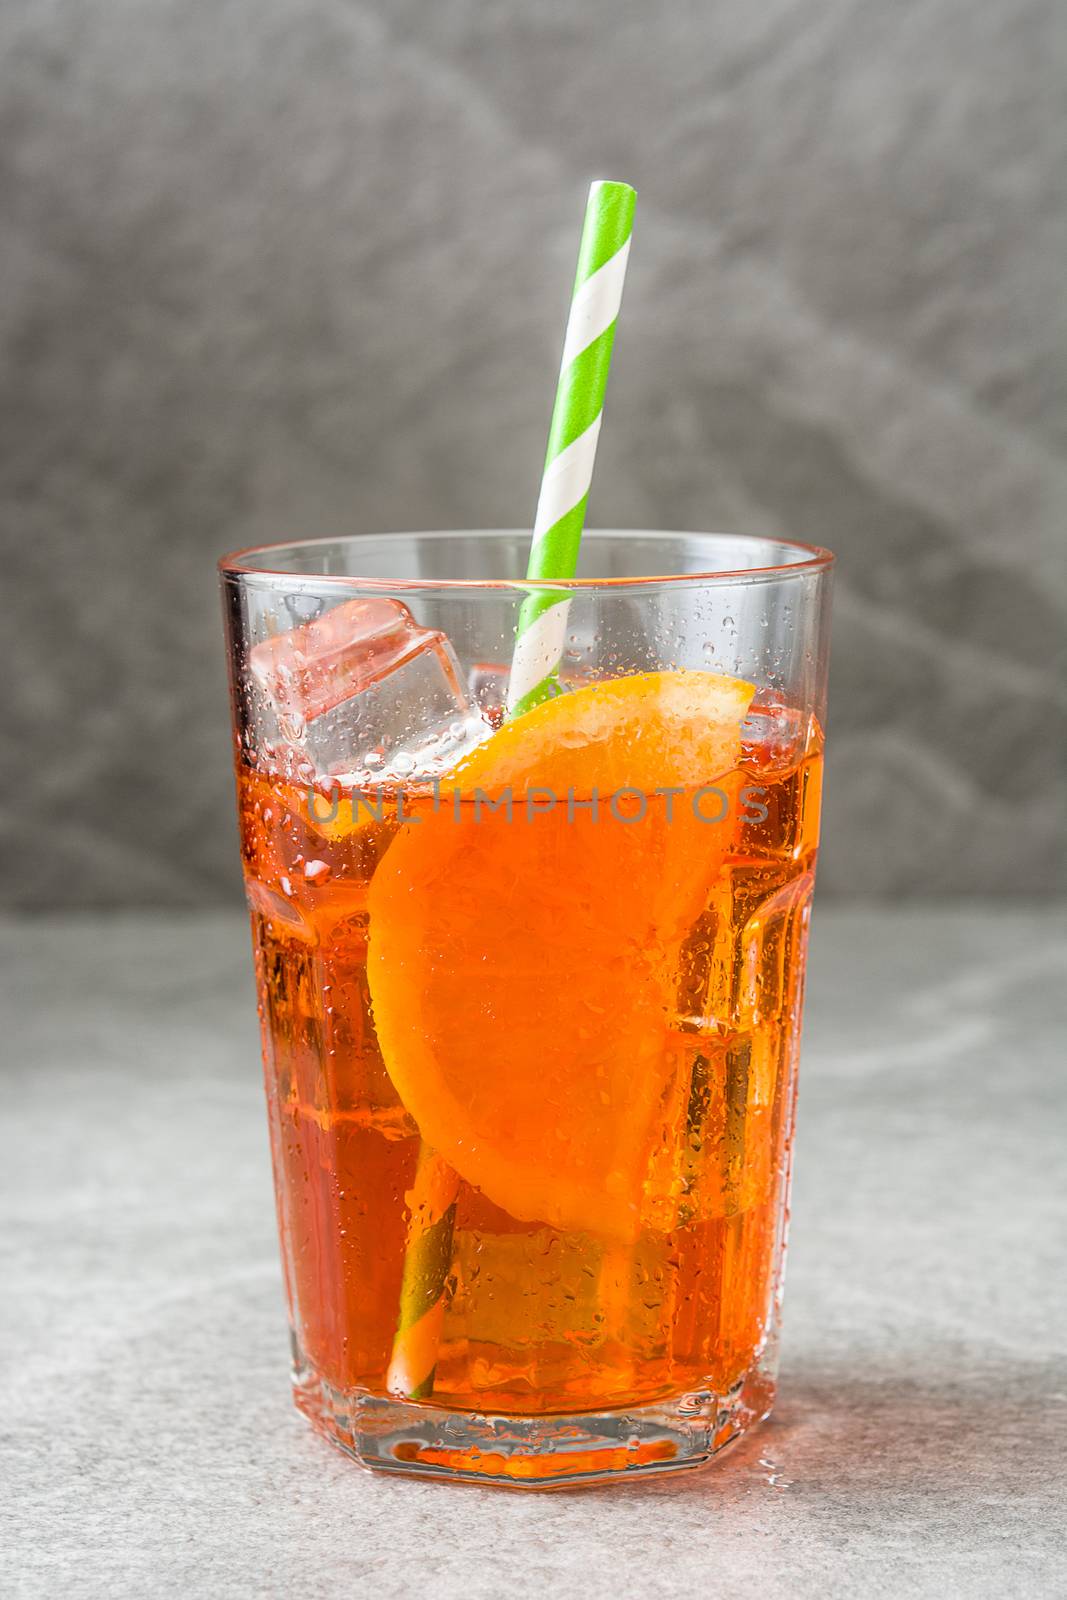 Aperol spritz cocktail in glass on gray stone by chandlervid85